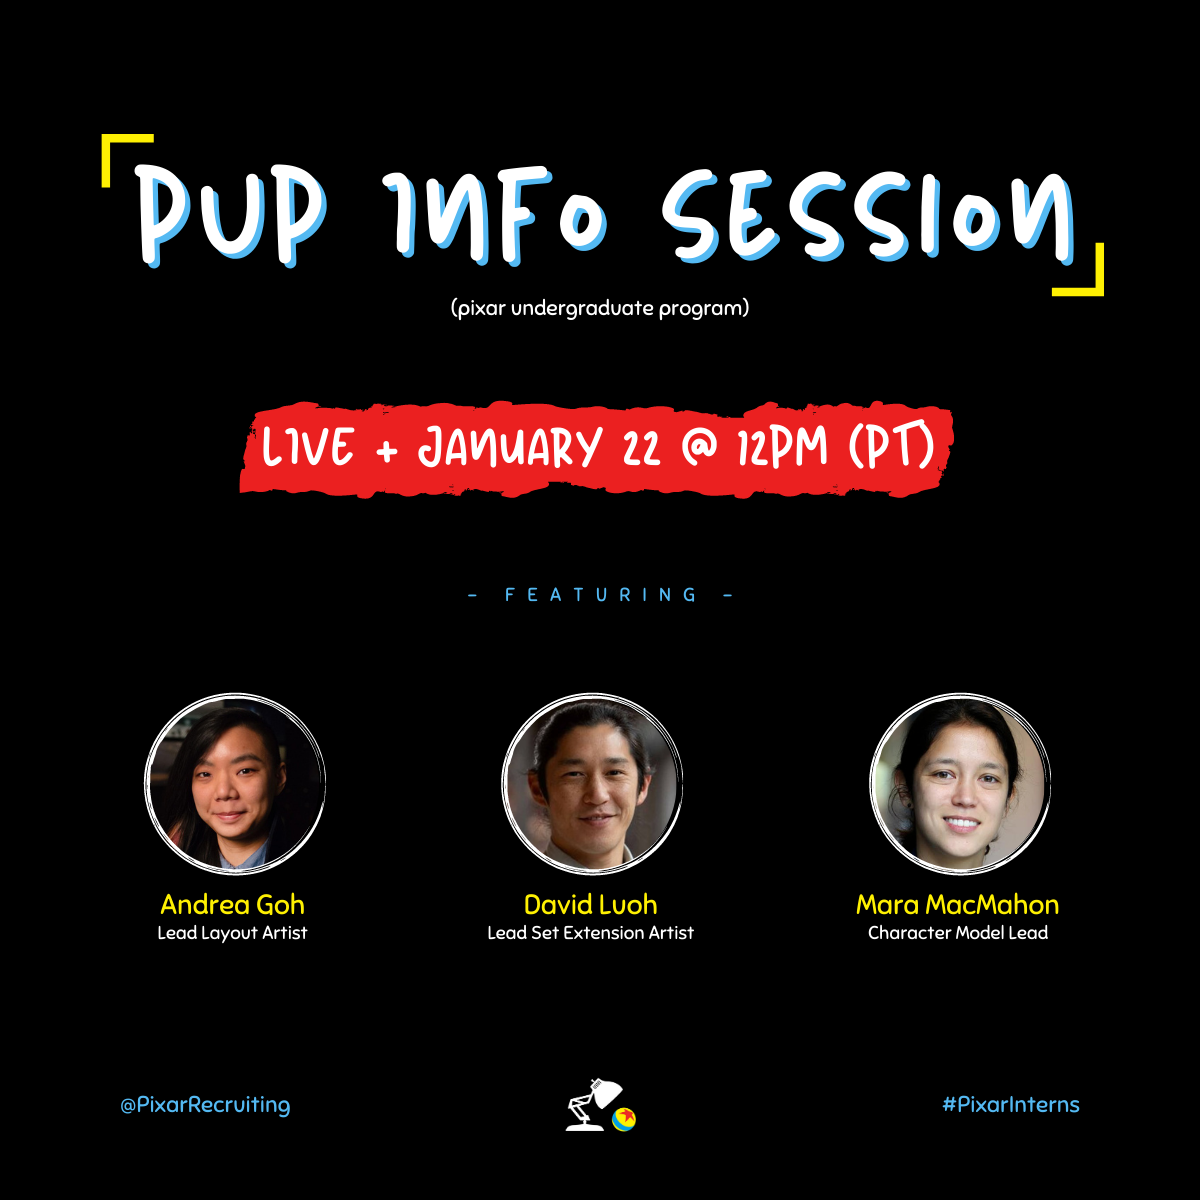 pup-info-session.png